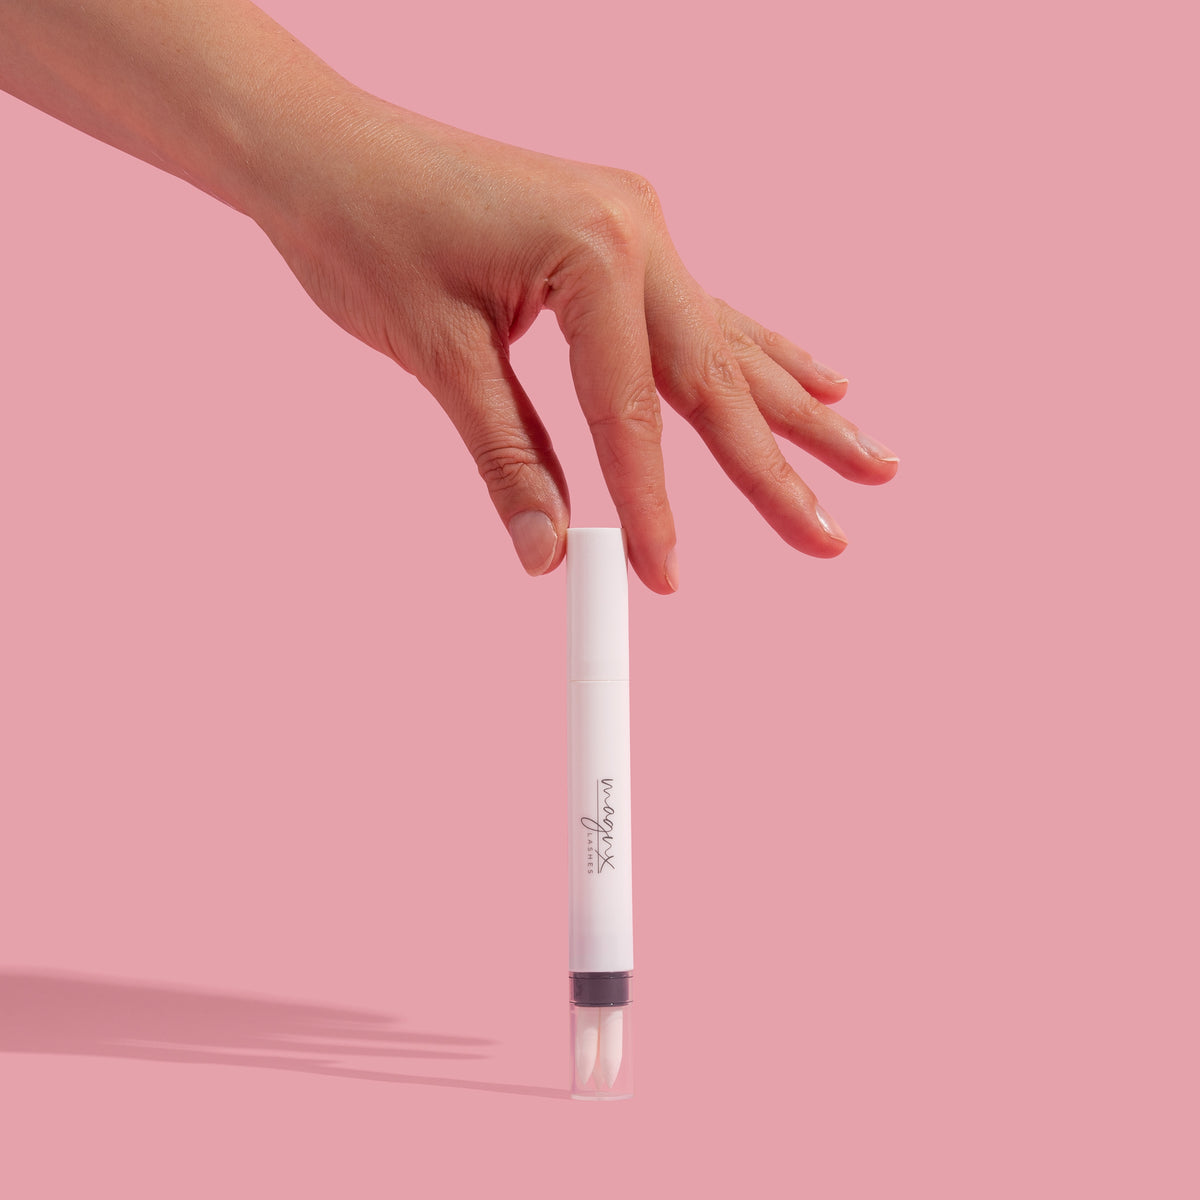 Clean It Up Make-up Remover Pen